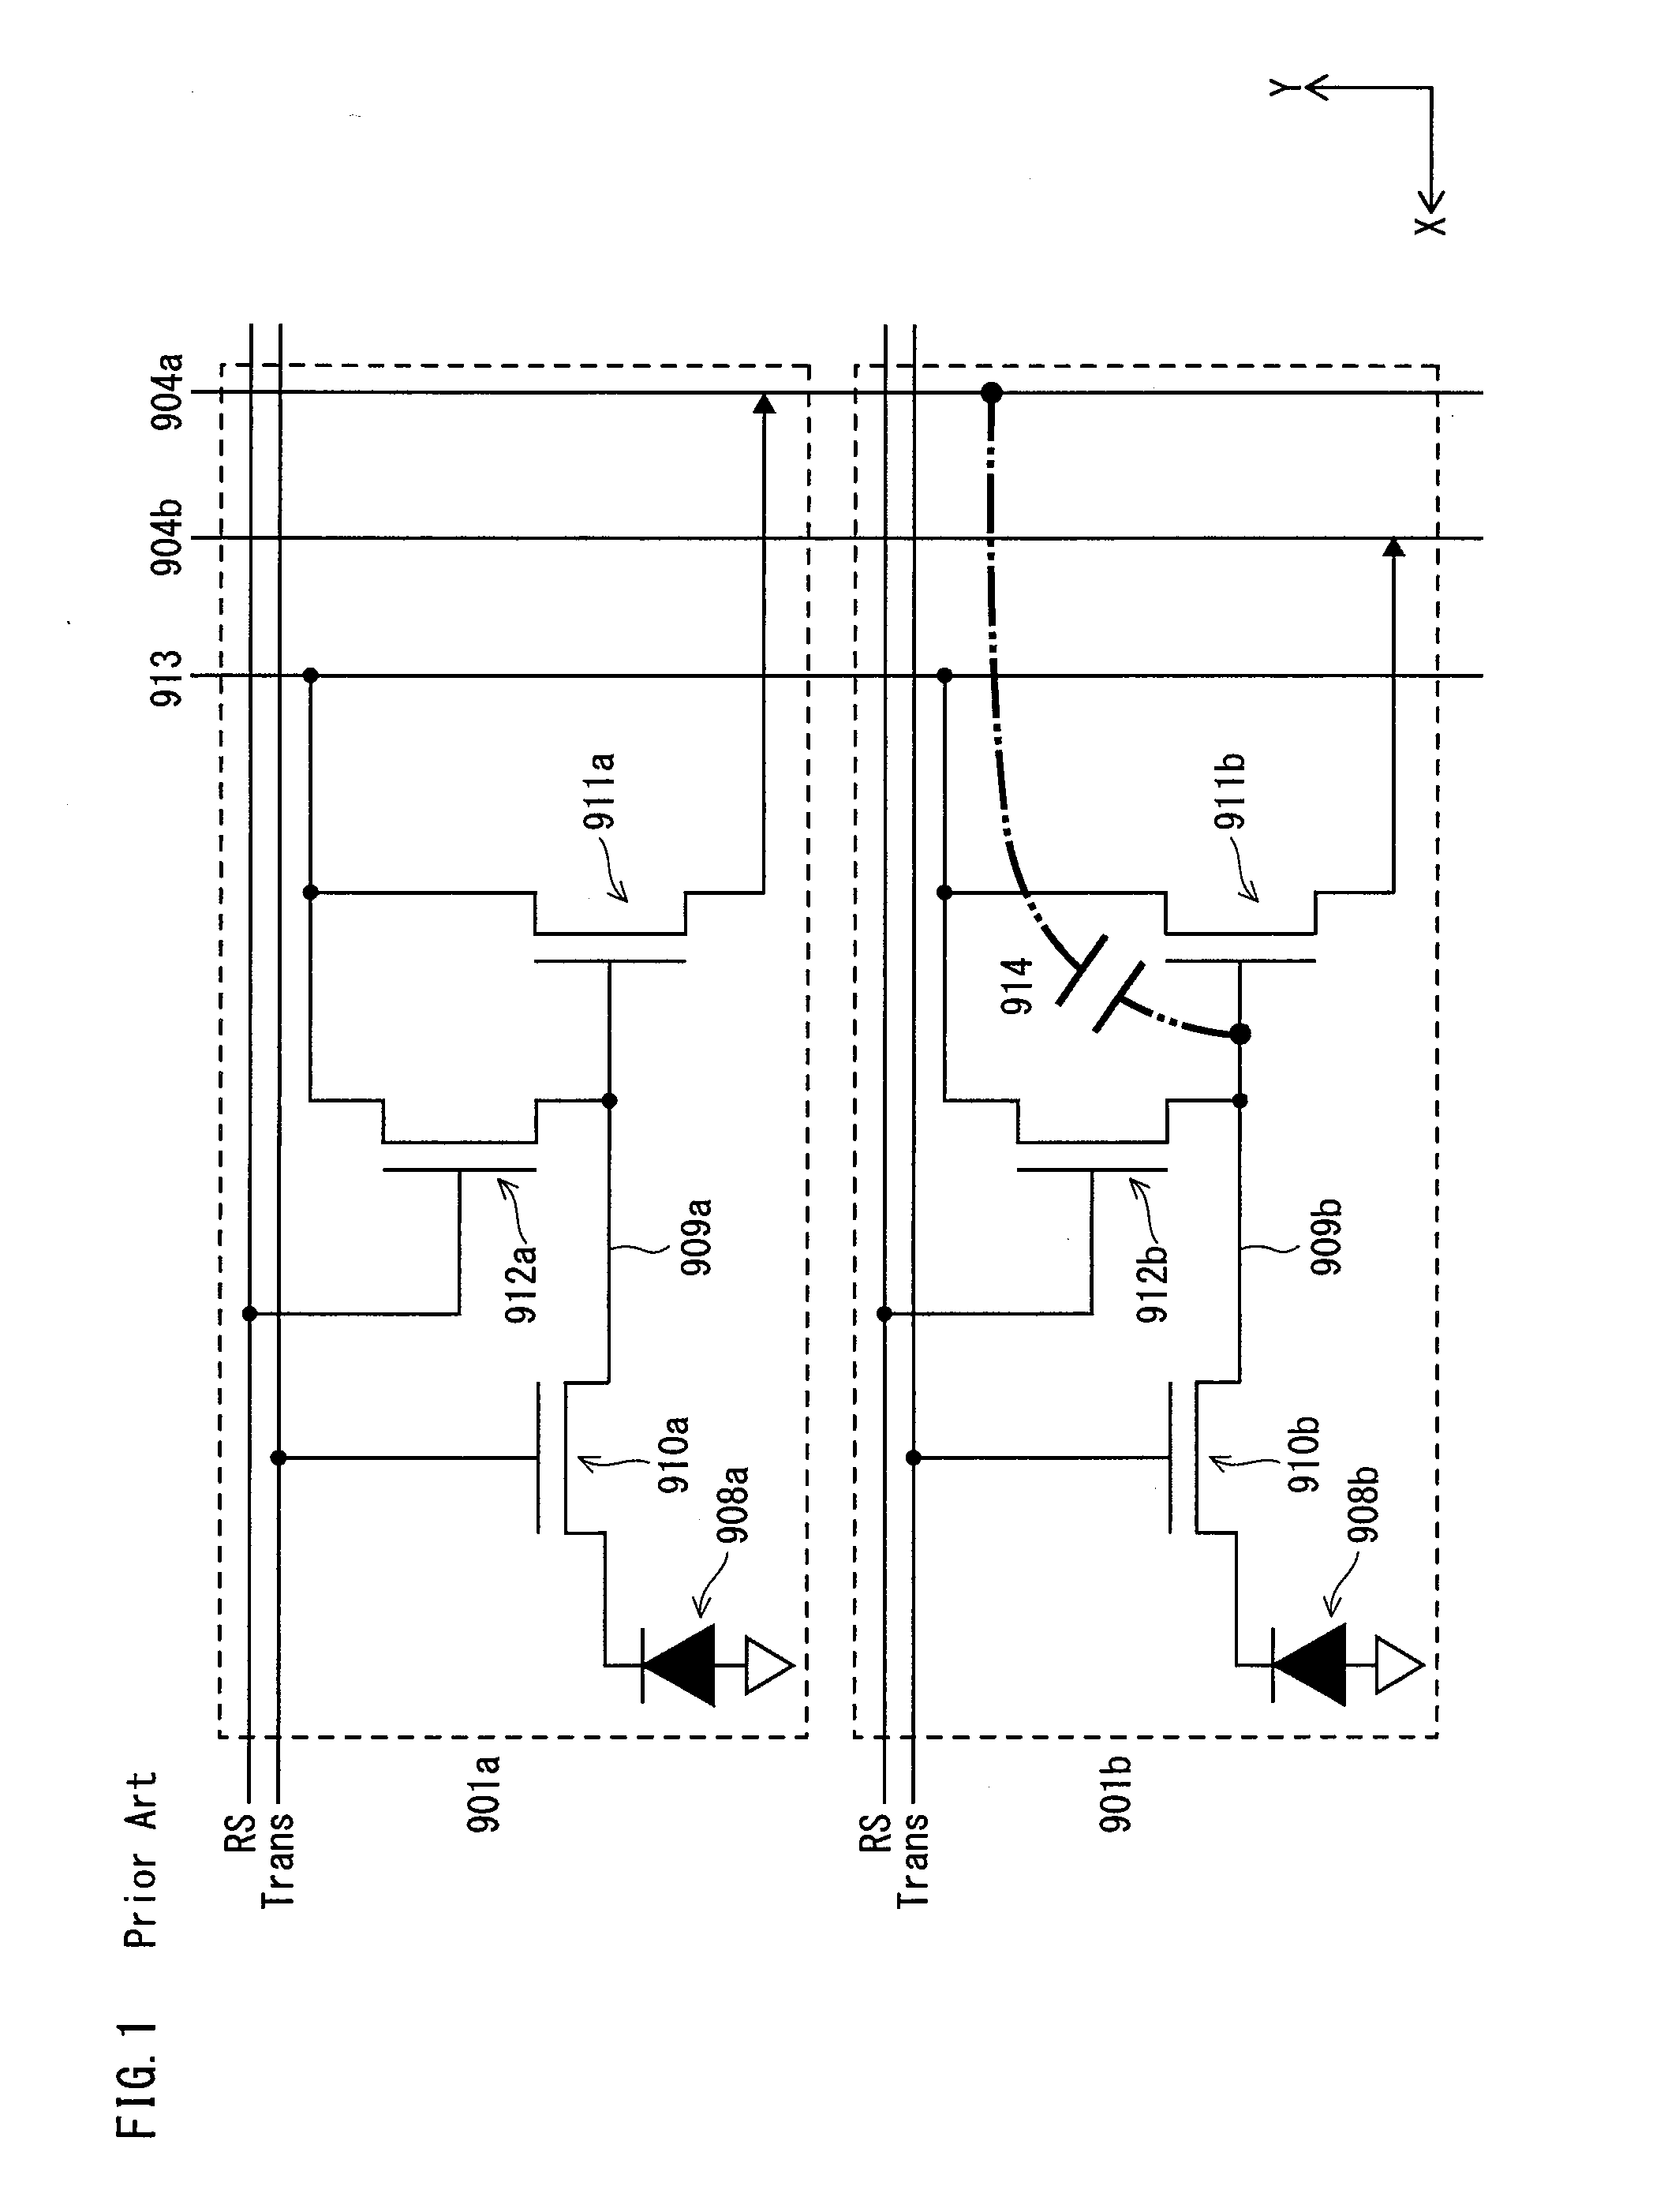 Solid state imaging device capable of parallel reading of data from a plurality of pixel cells